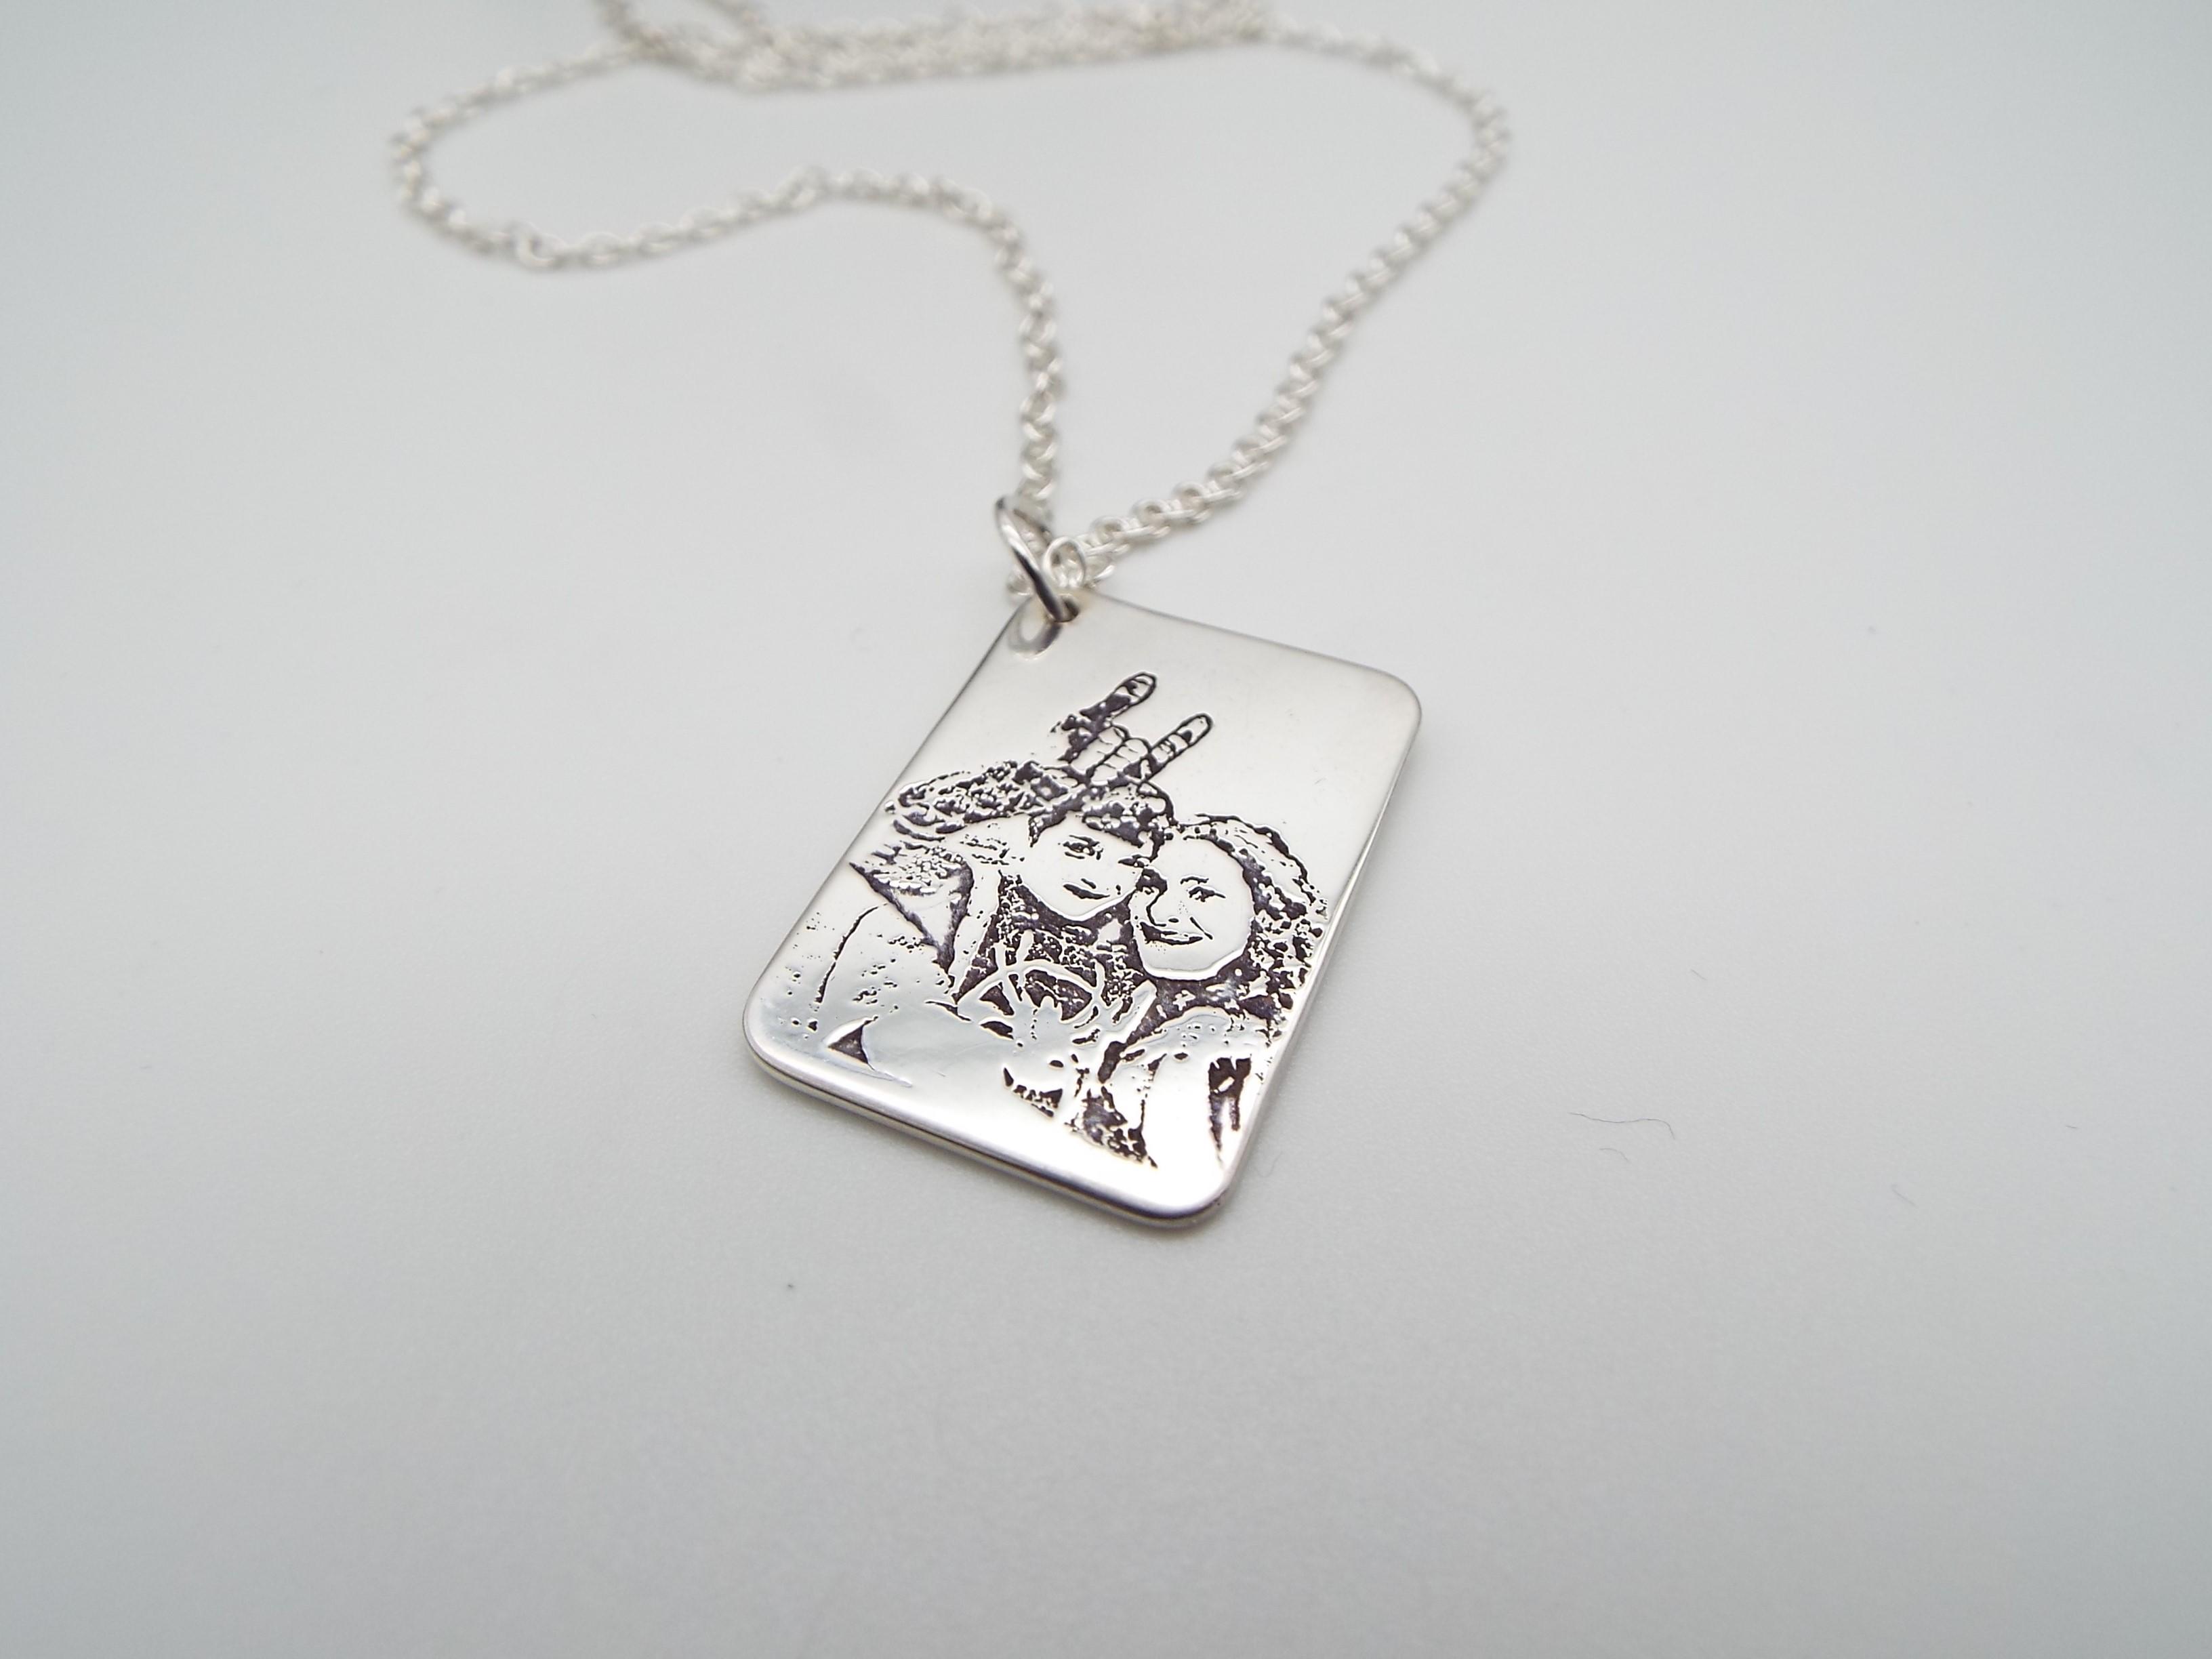 photo engraved into silver necklace